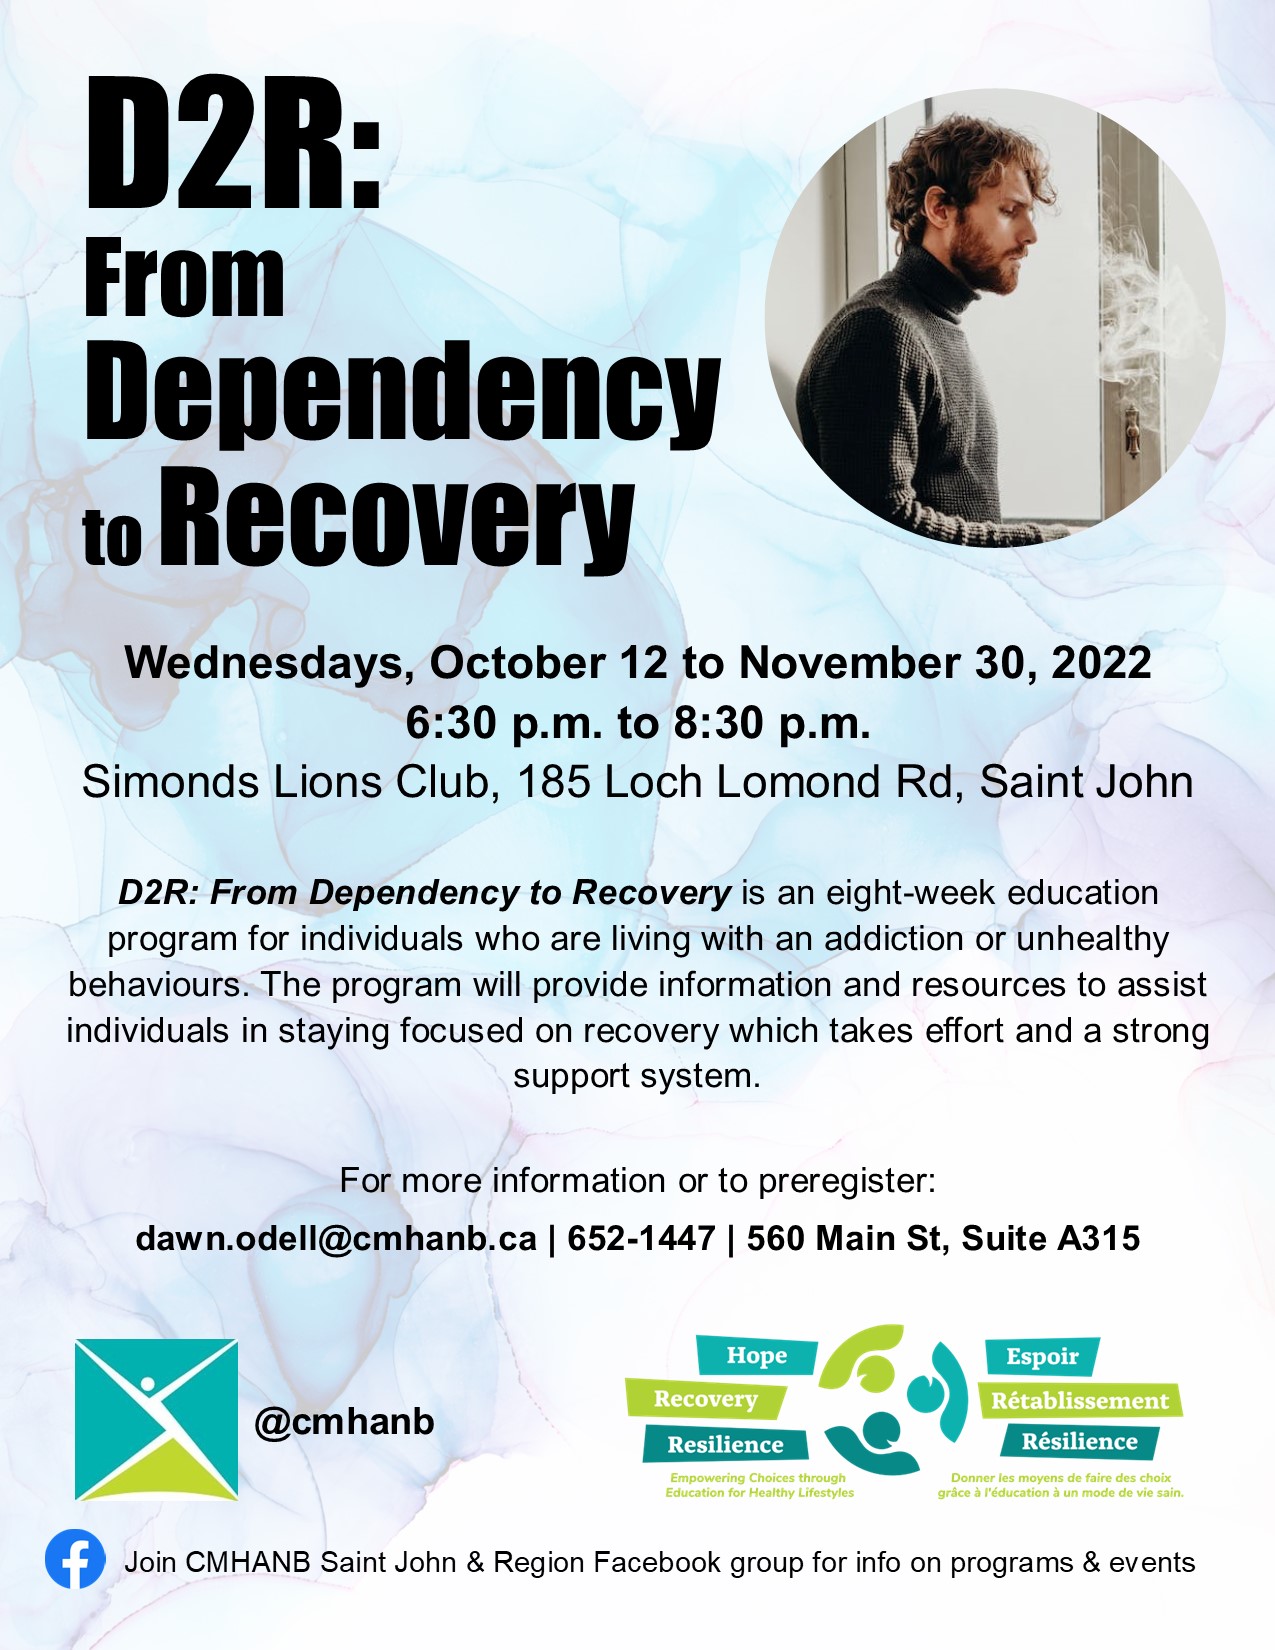 D2R: Dependency to Recovery